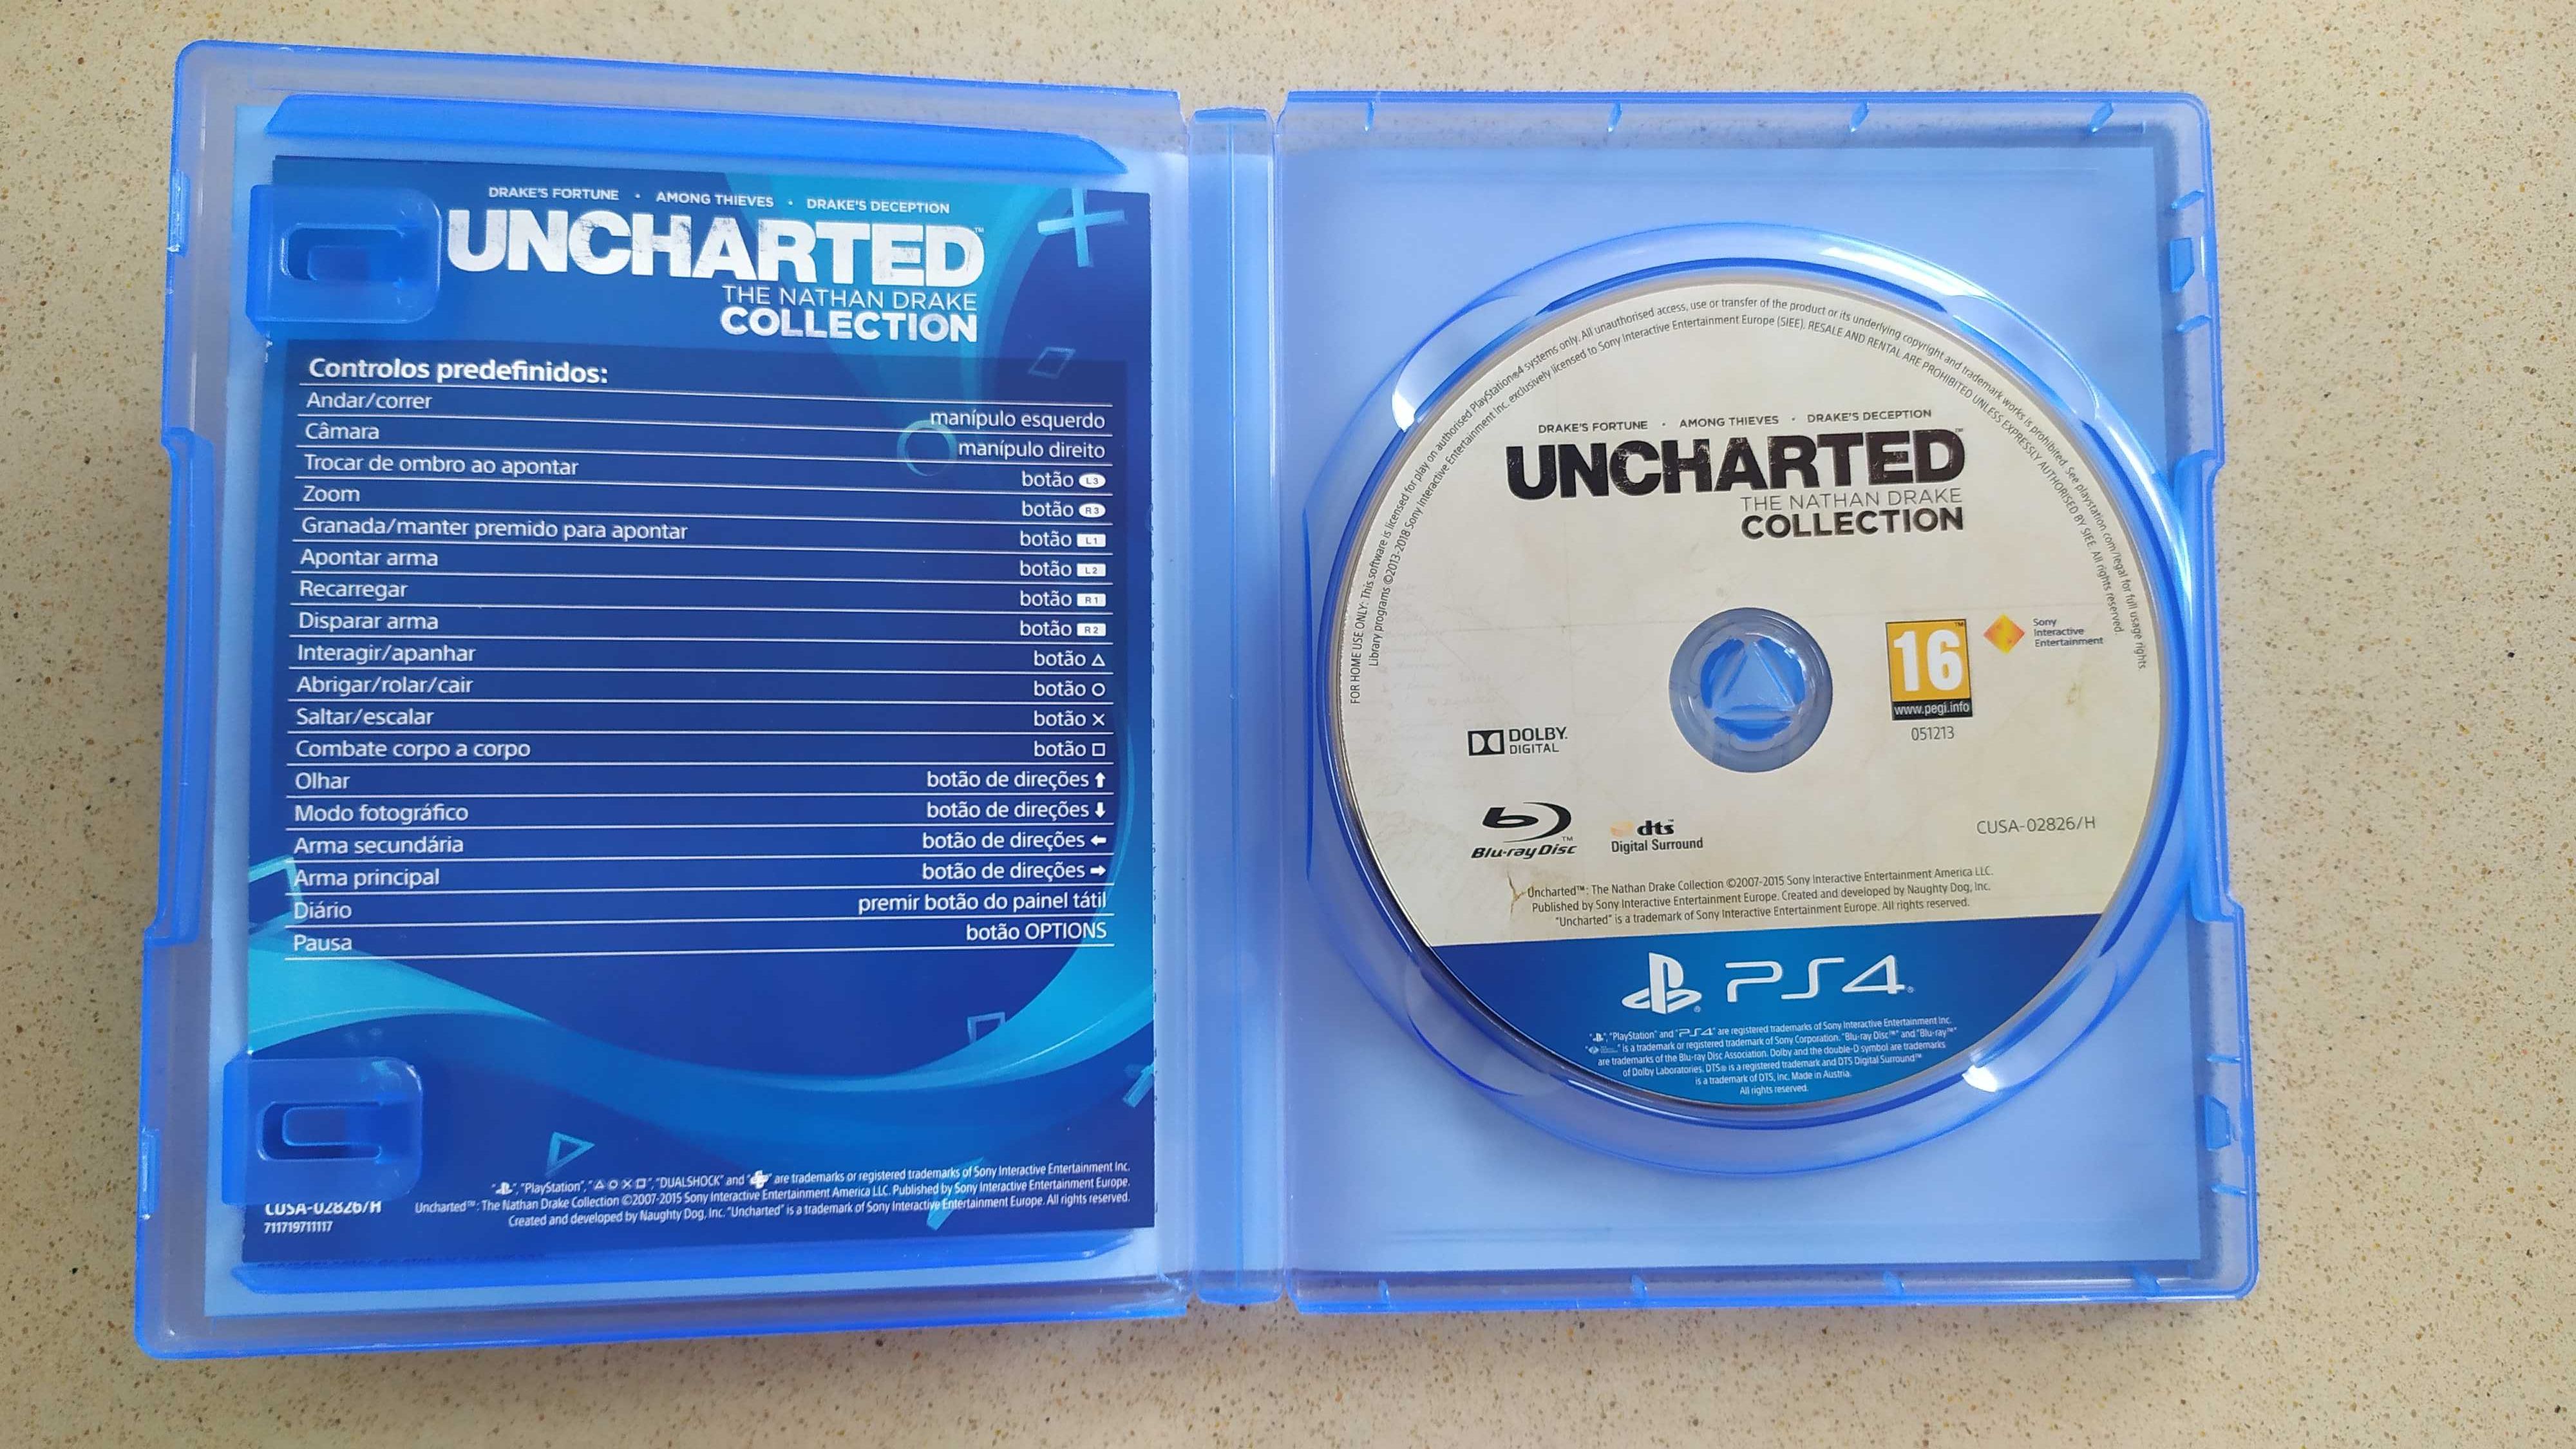 Spider man e Uncharted The Nathan Drake collection